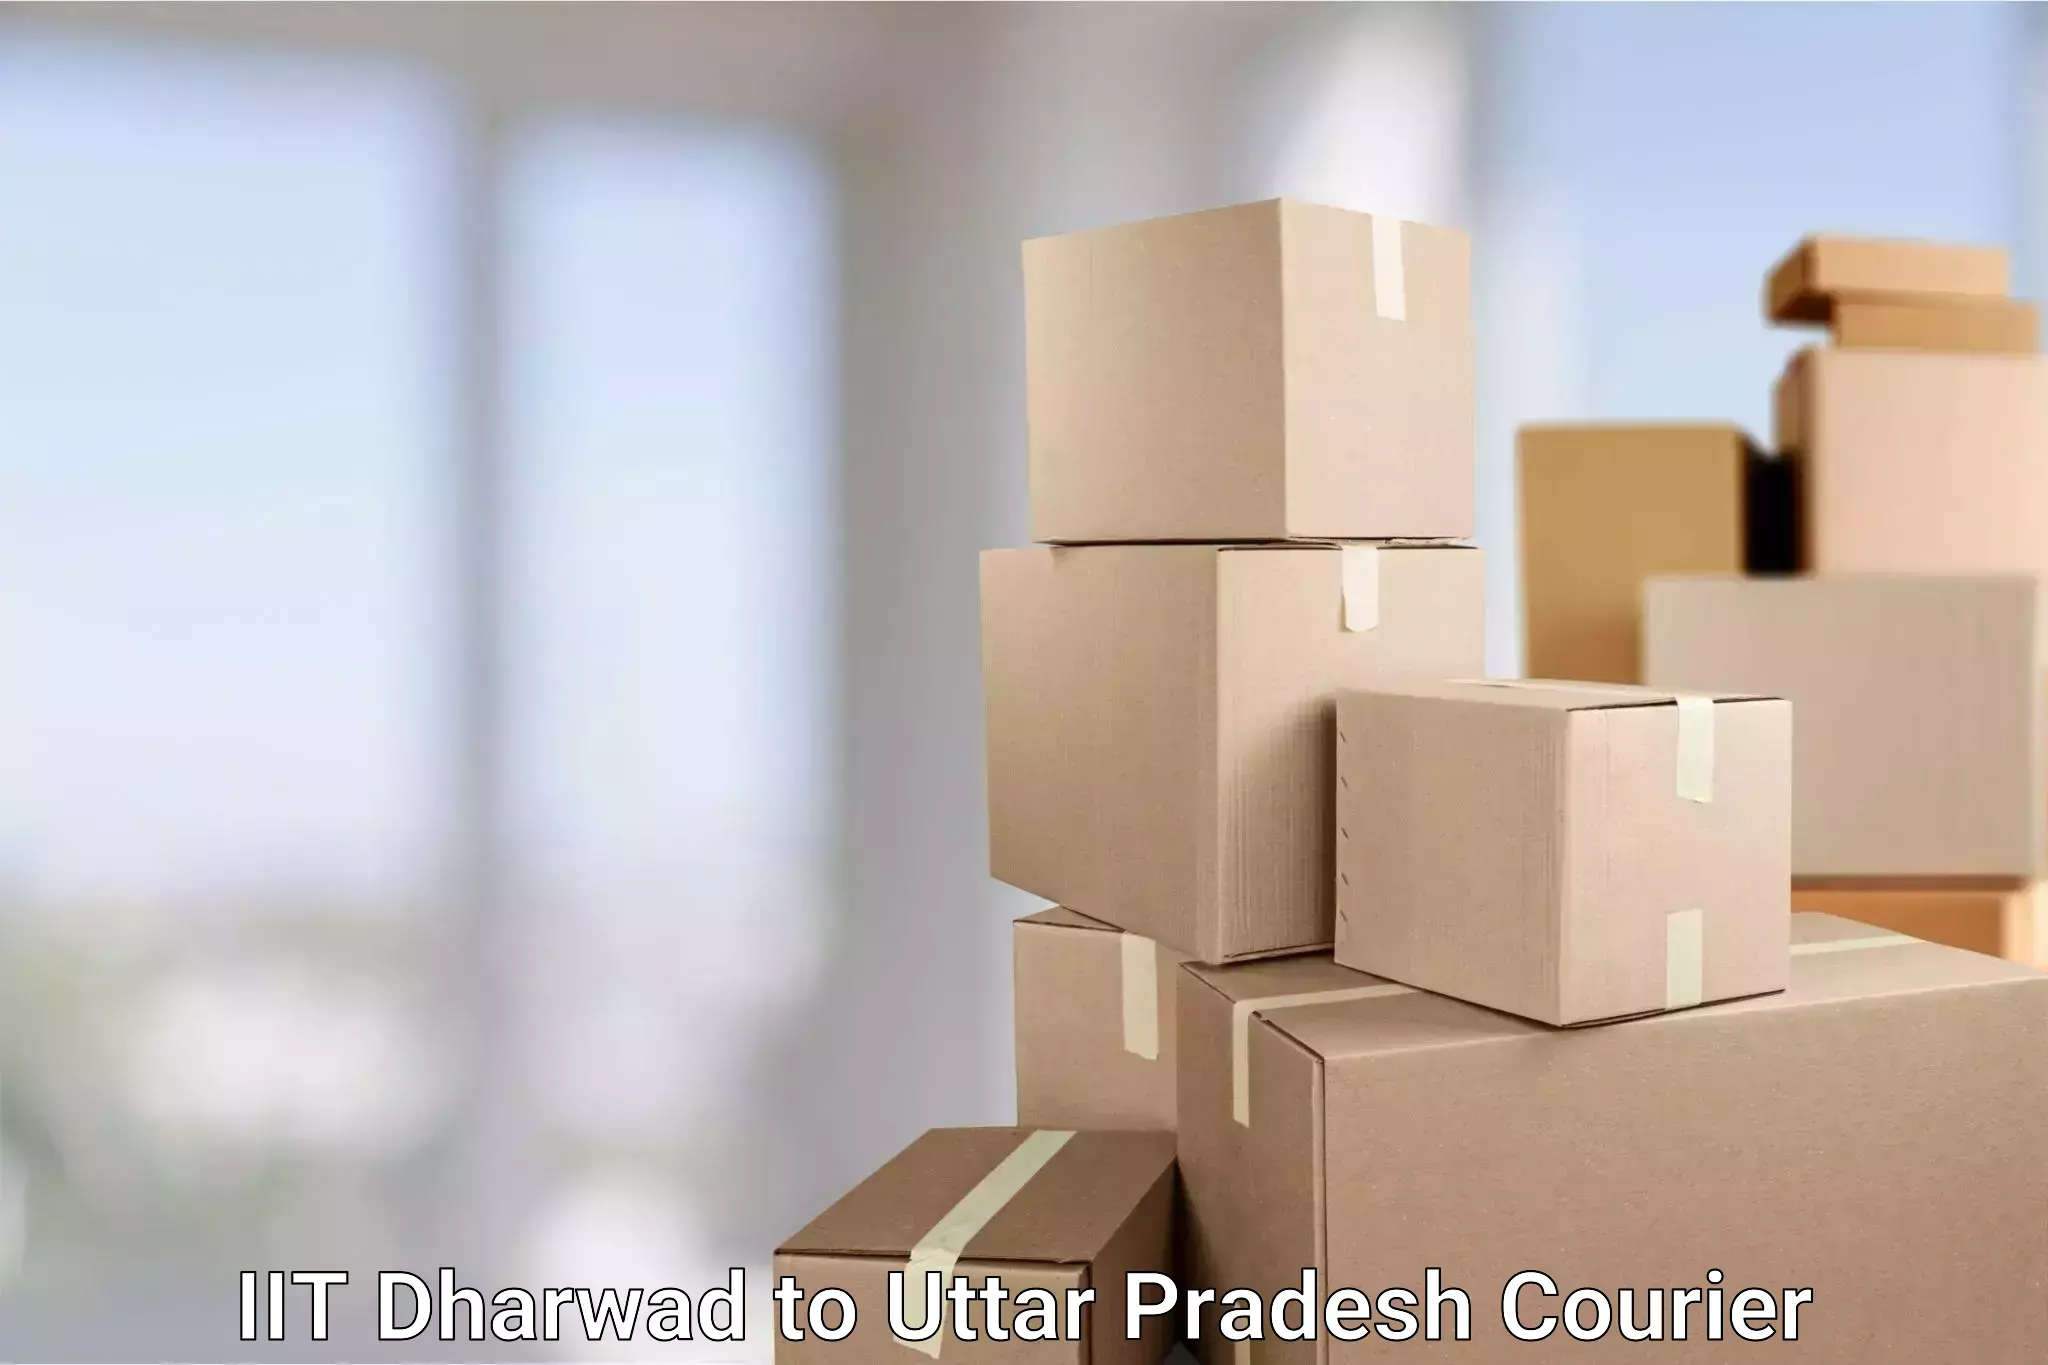 Reliable delivery network IIT Dharwad to Aligarh